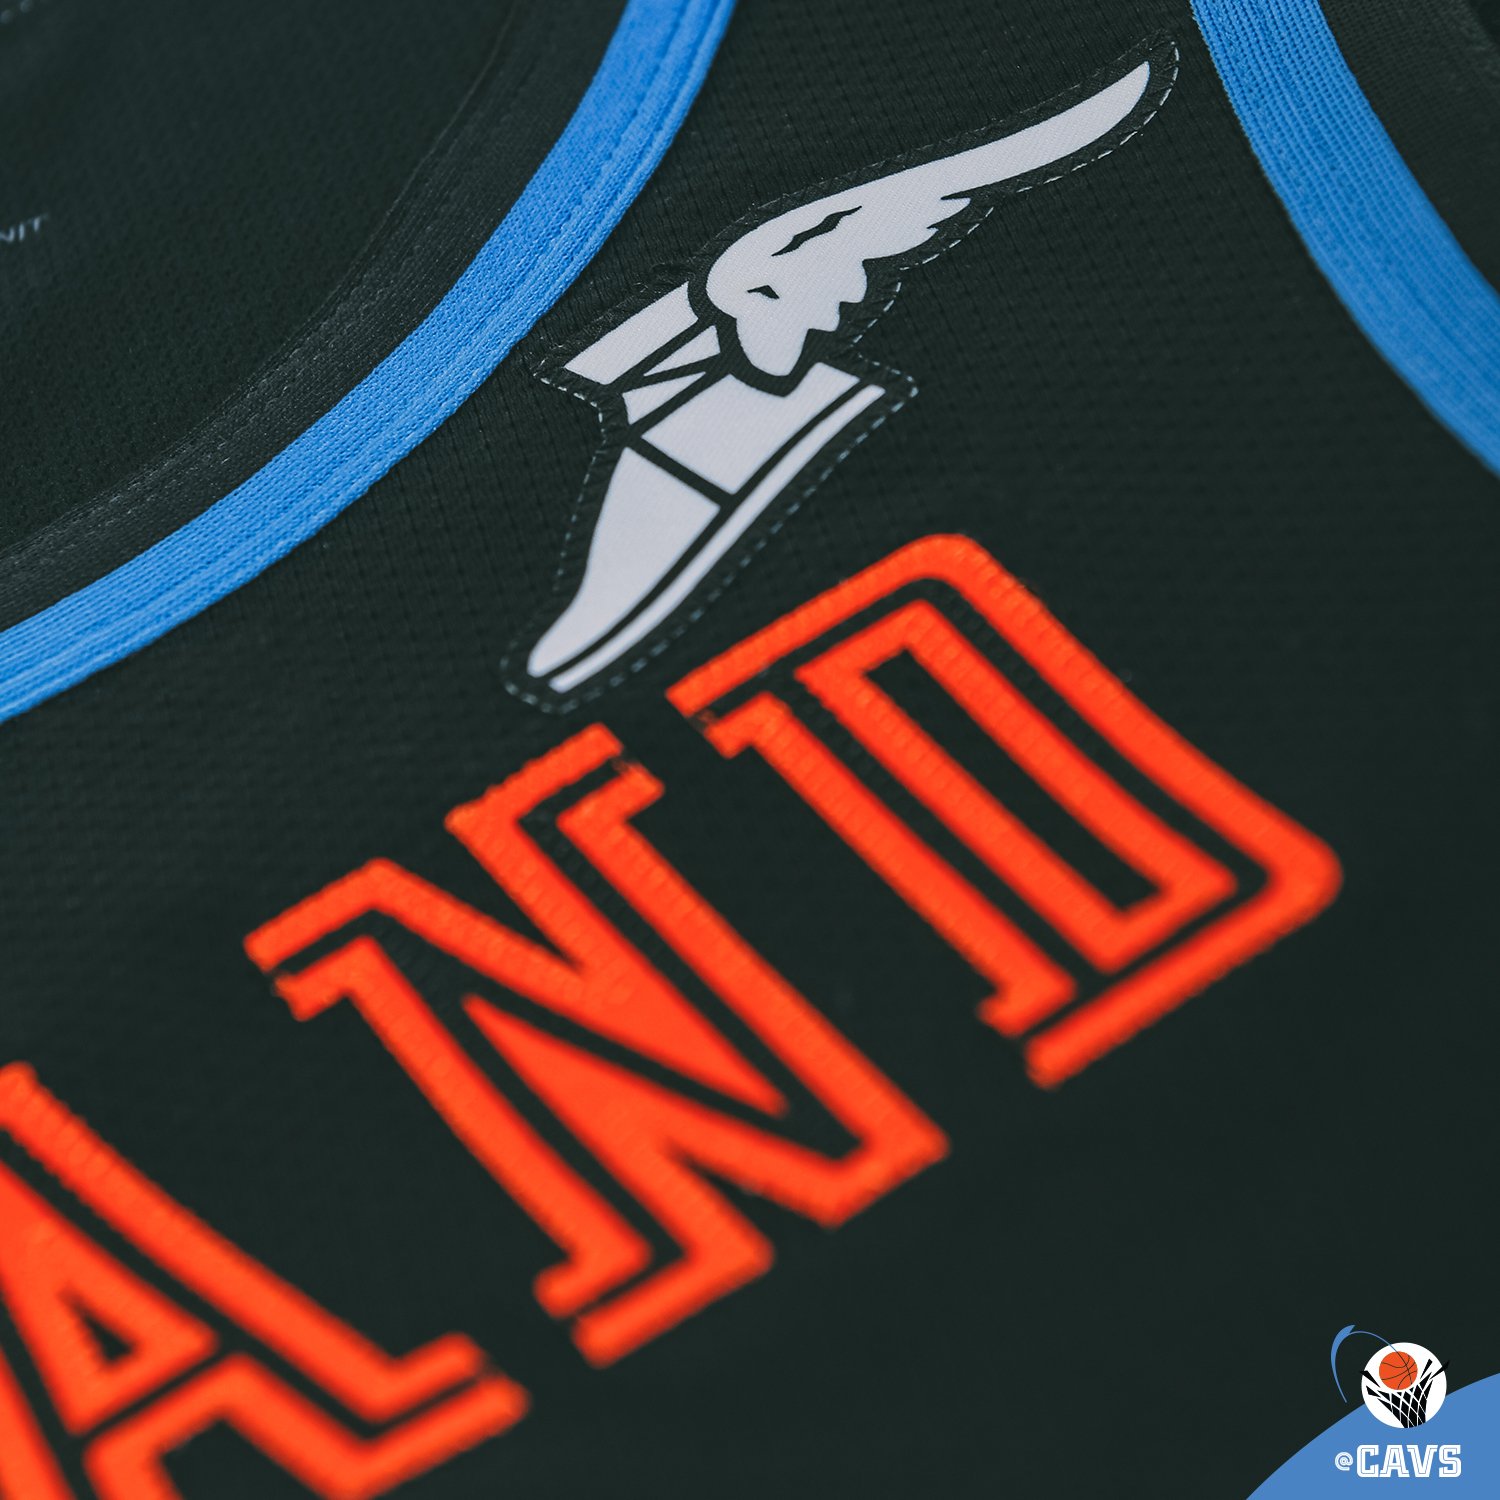 Cavaliers going back to the '90s with retro black and powder blue swoosh  uniforms this season 